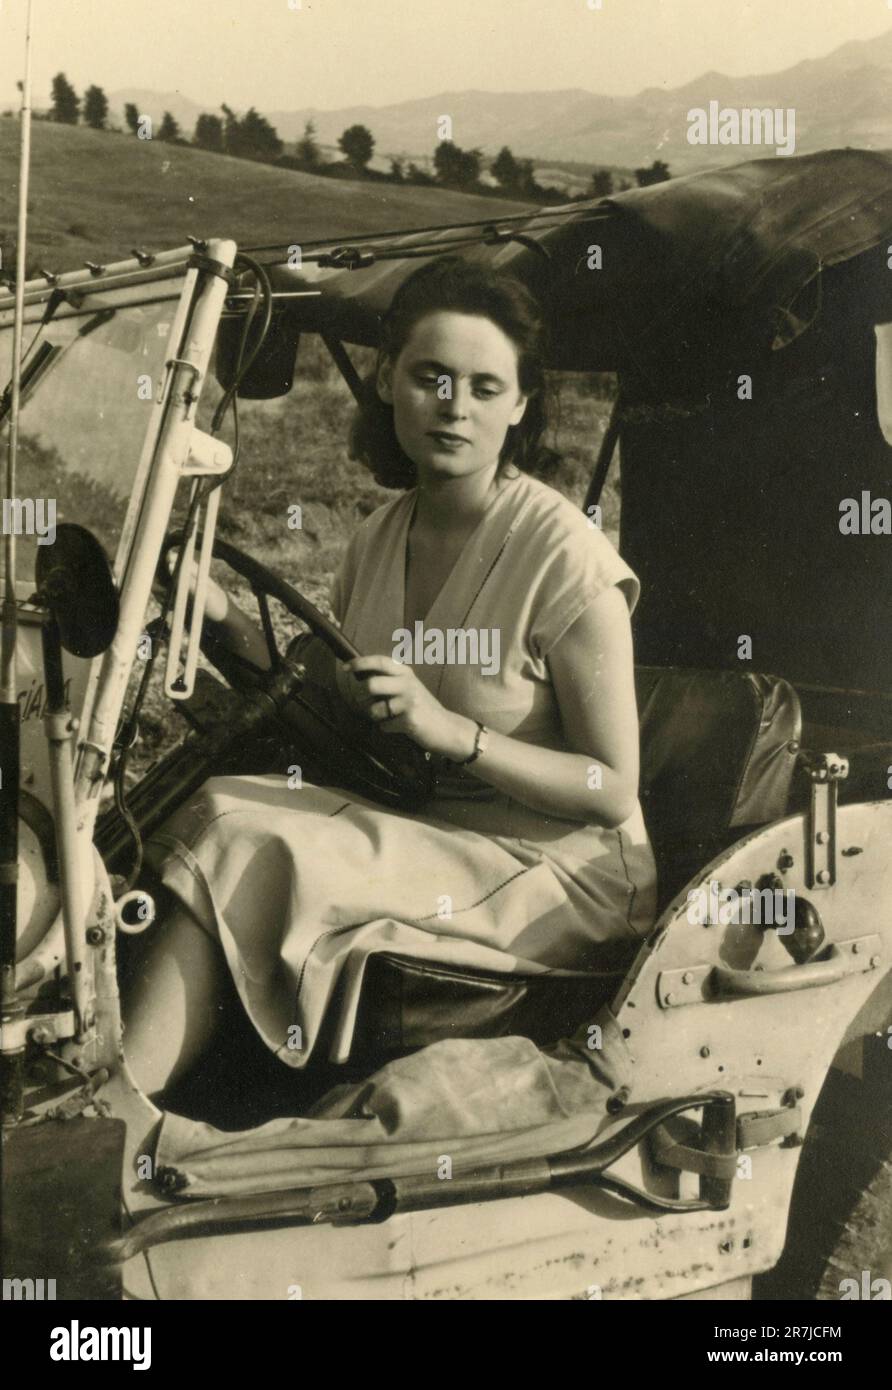 Woman driving a military Willis Jeep car, Italy 1950s Stock Photo